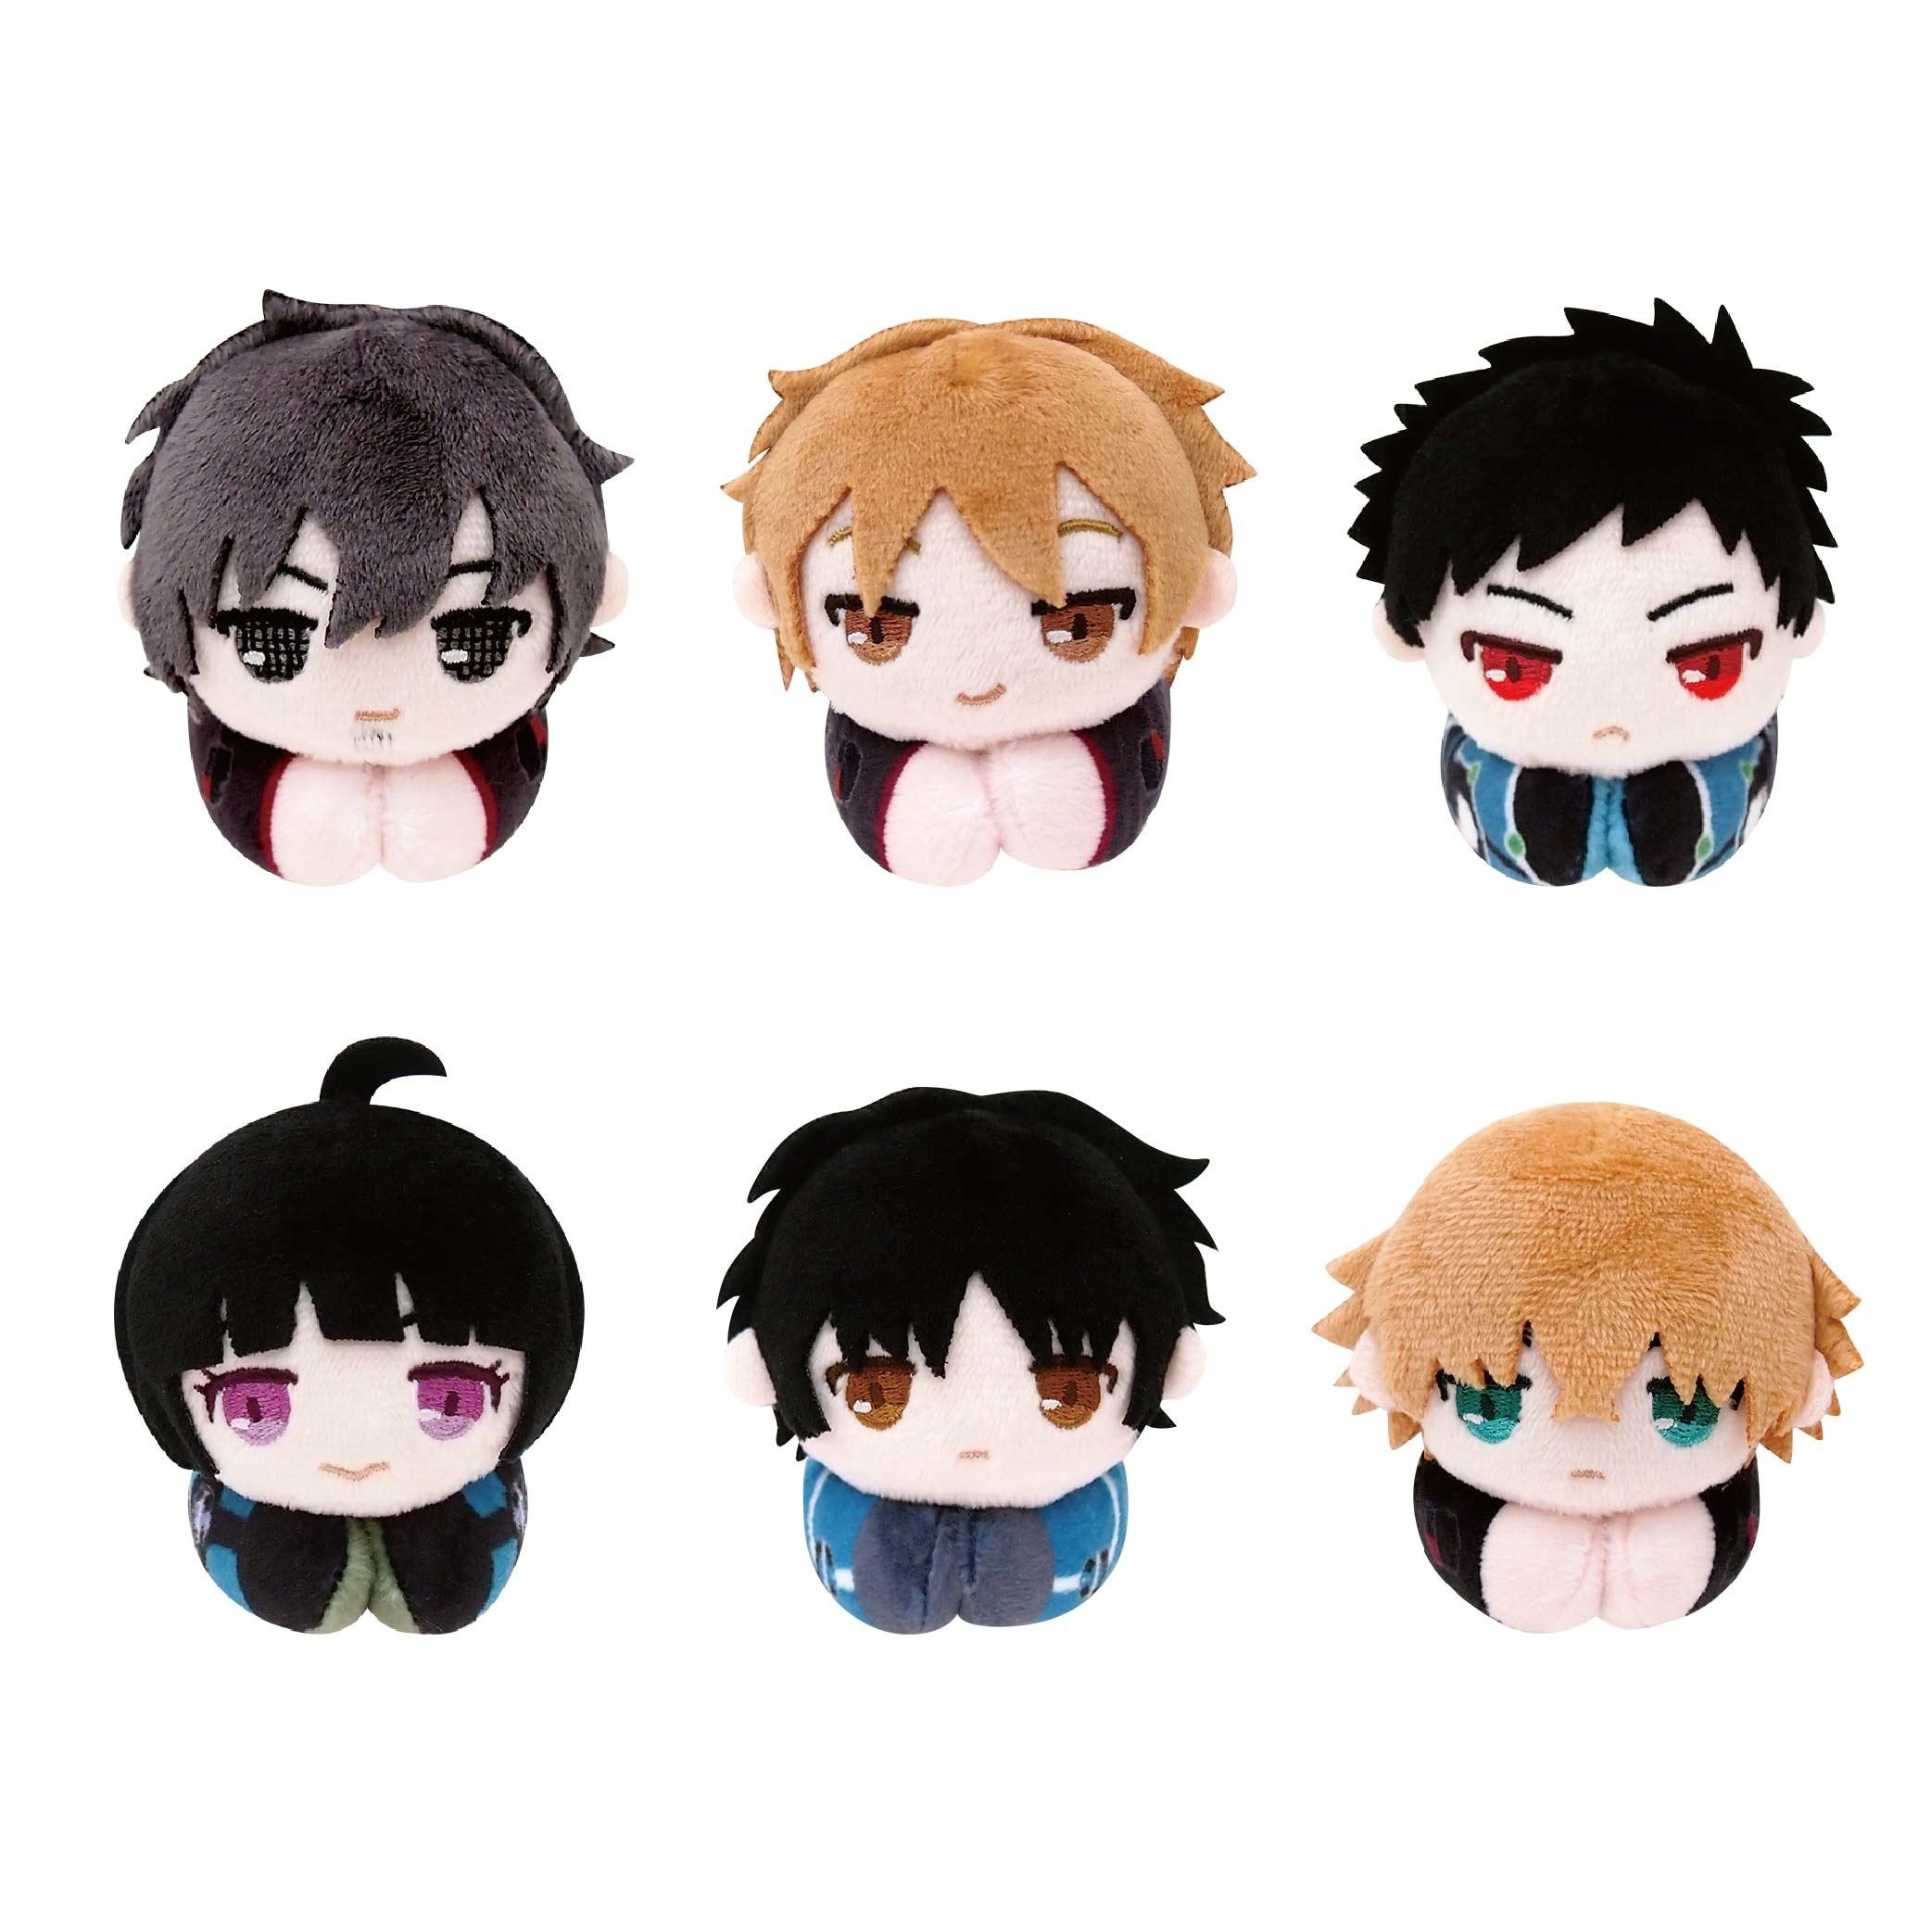 World Trigger Hug x Character Collection 2: WR-04 (Set of 6 pieces) TakaraTomy